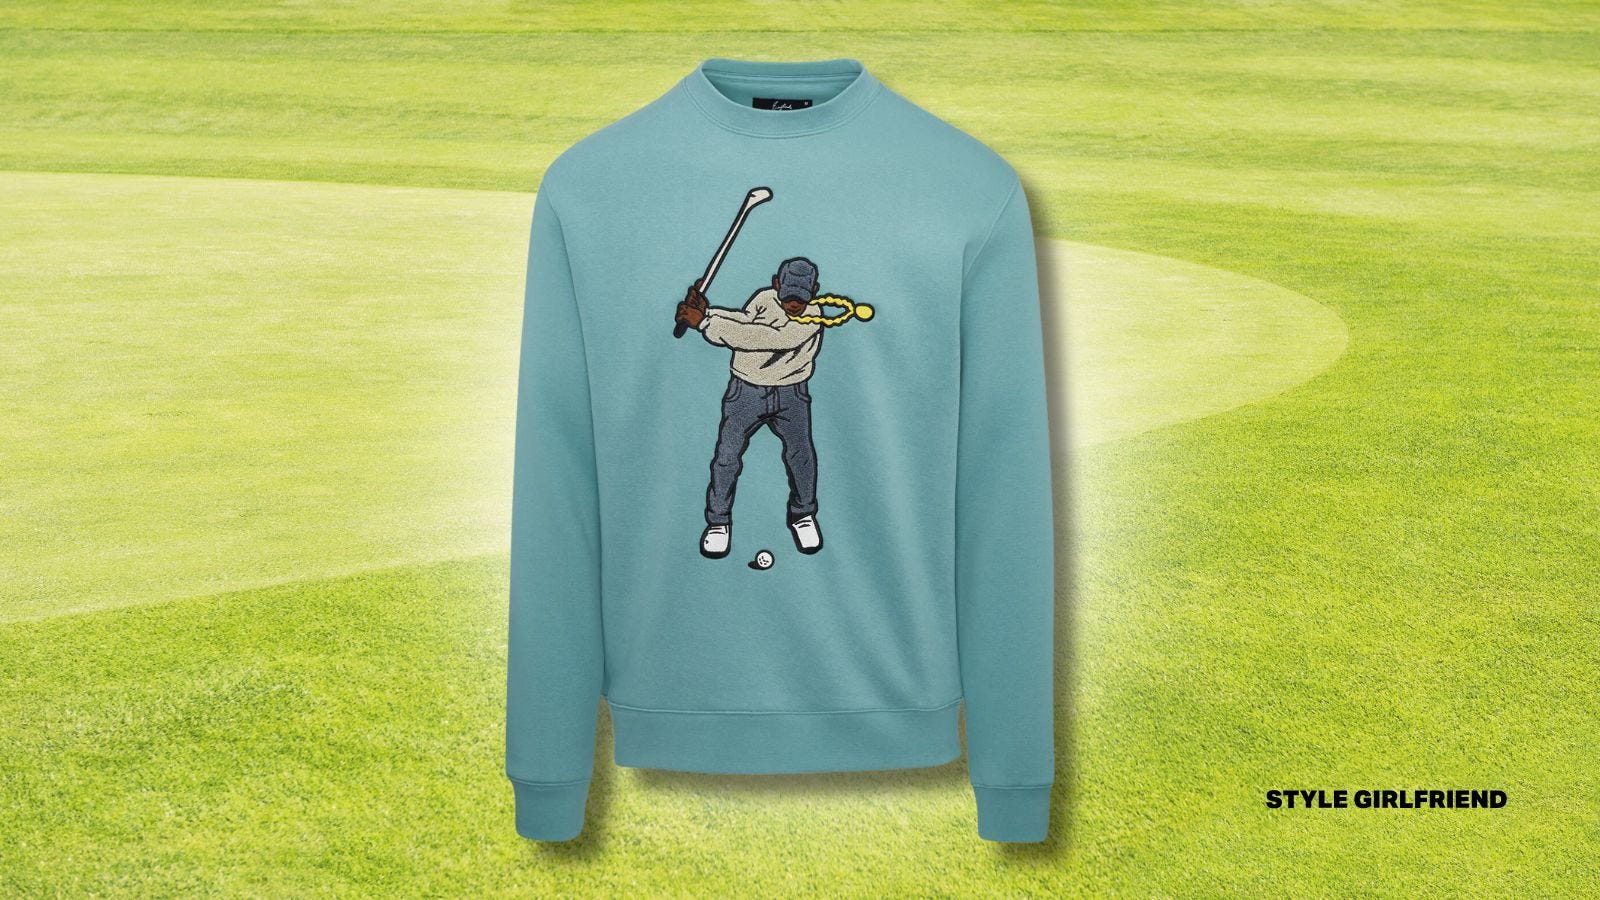 green sweatshirt with embroidery of man swinging golf club on front, set against a golf green background